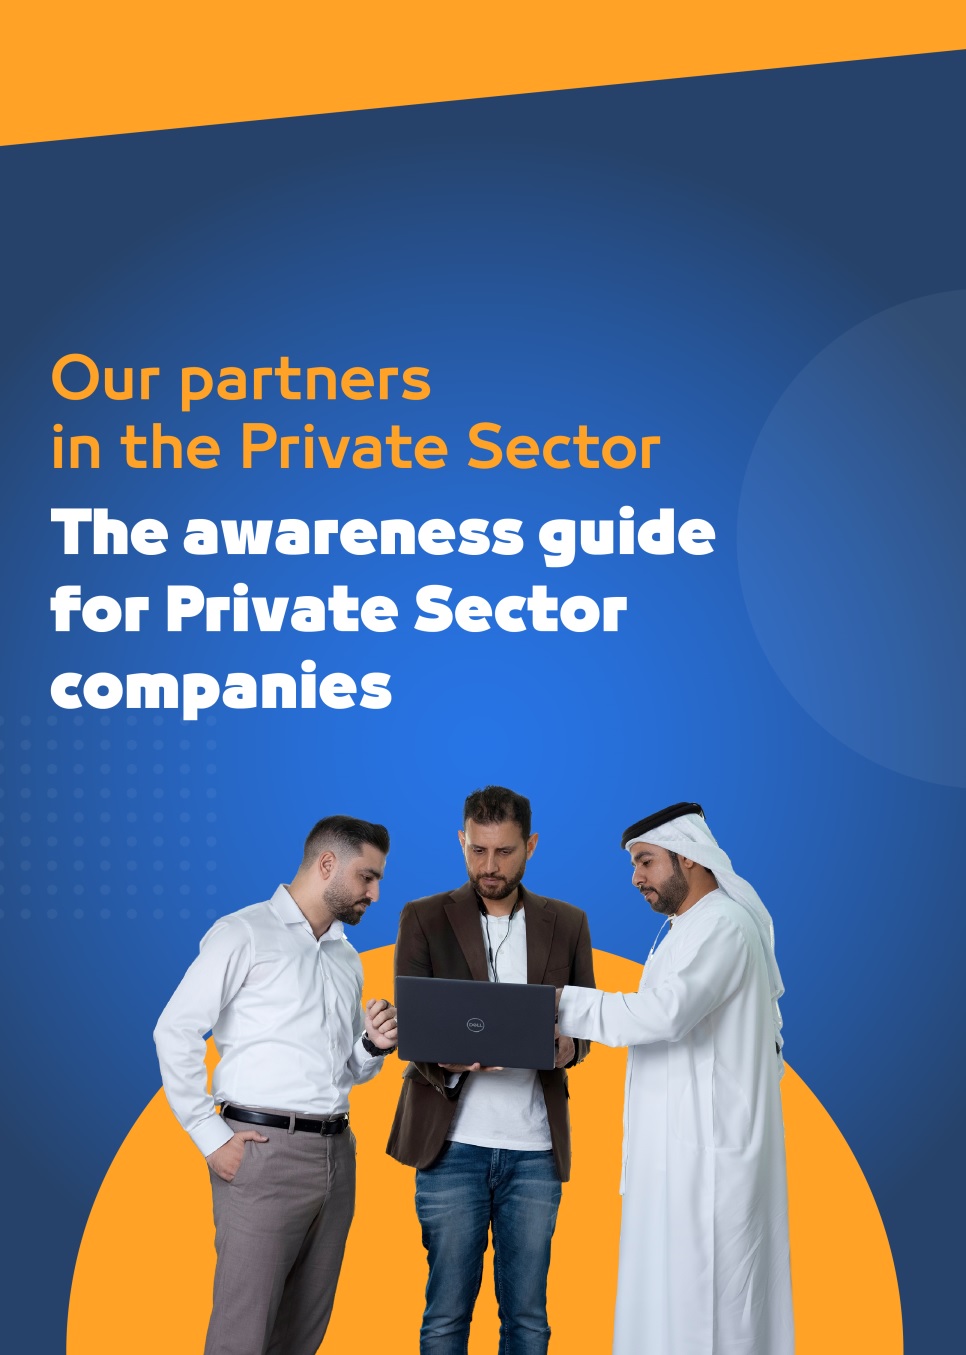 The Awareness Guide for Private Sector Companies